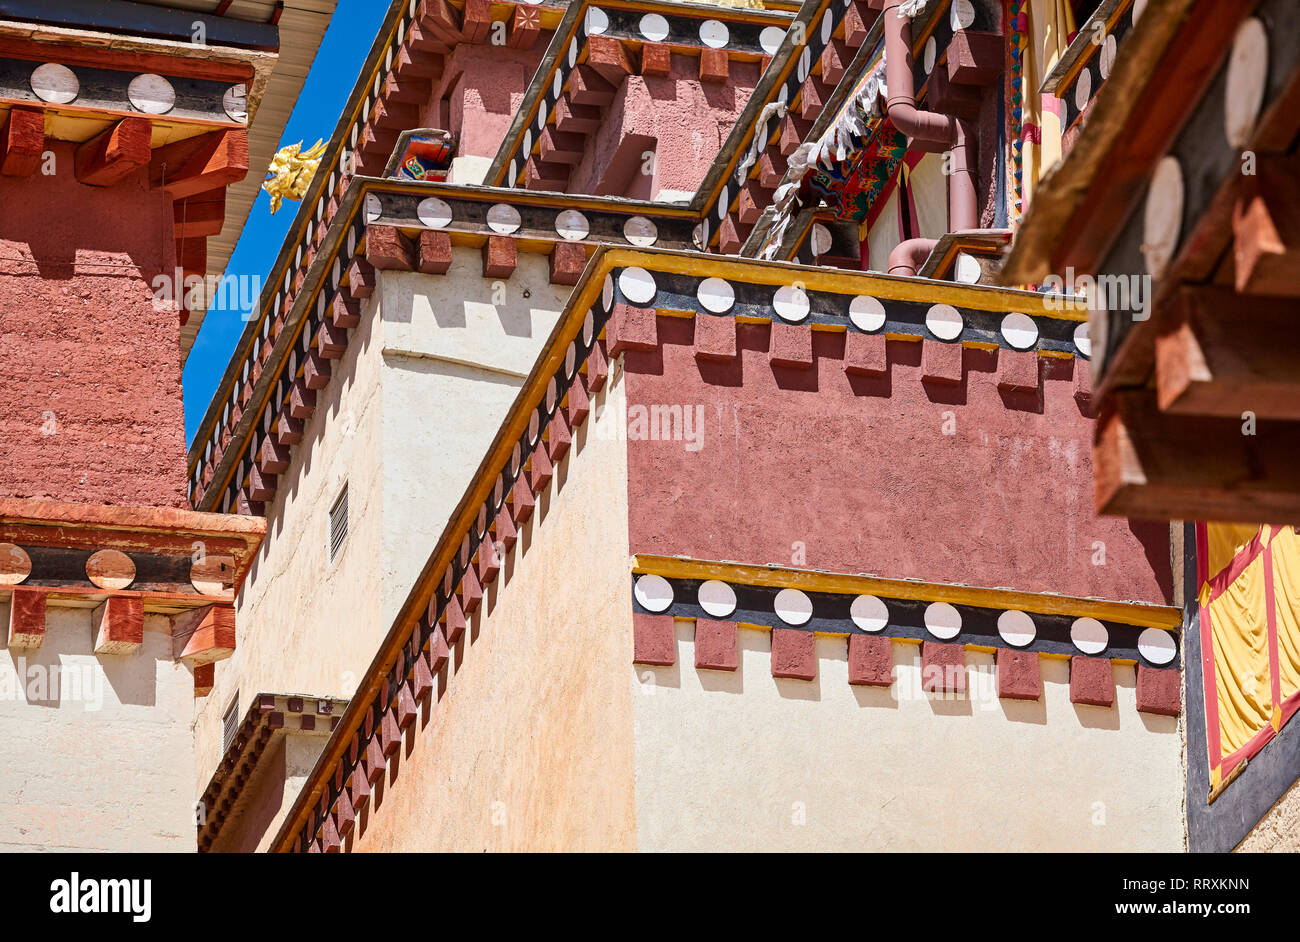 Architecture details of the Songzanlin Monastery, also known as the Ganden Sumtseling Monastery. Stock Photo